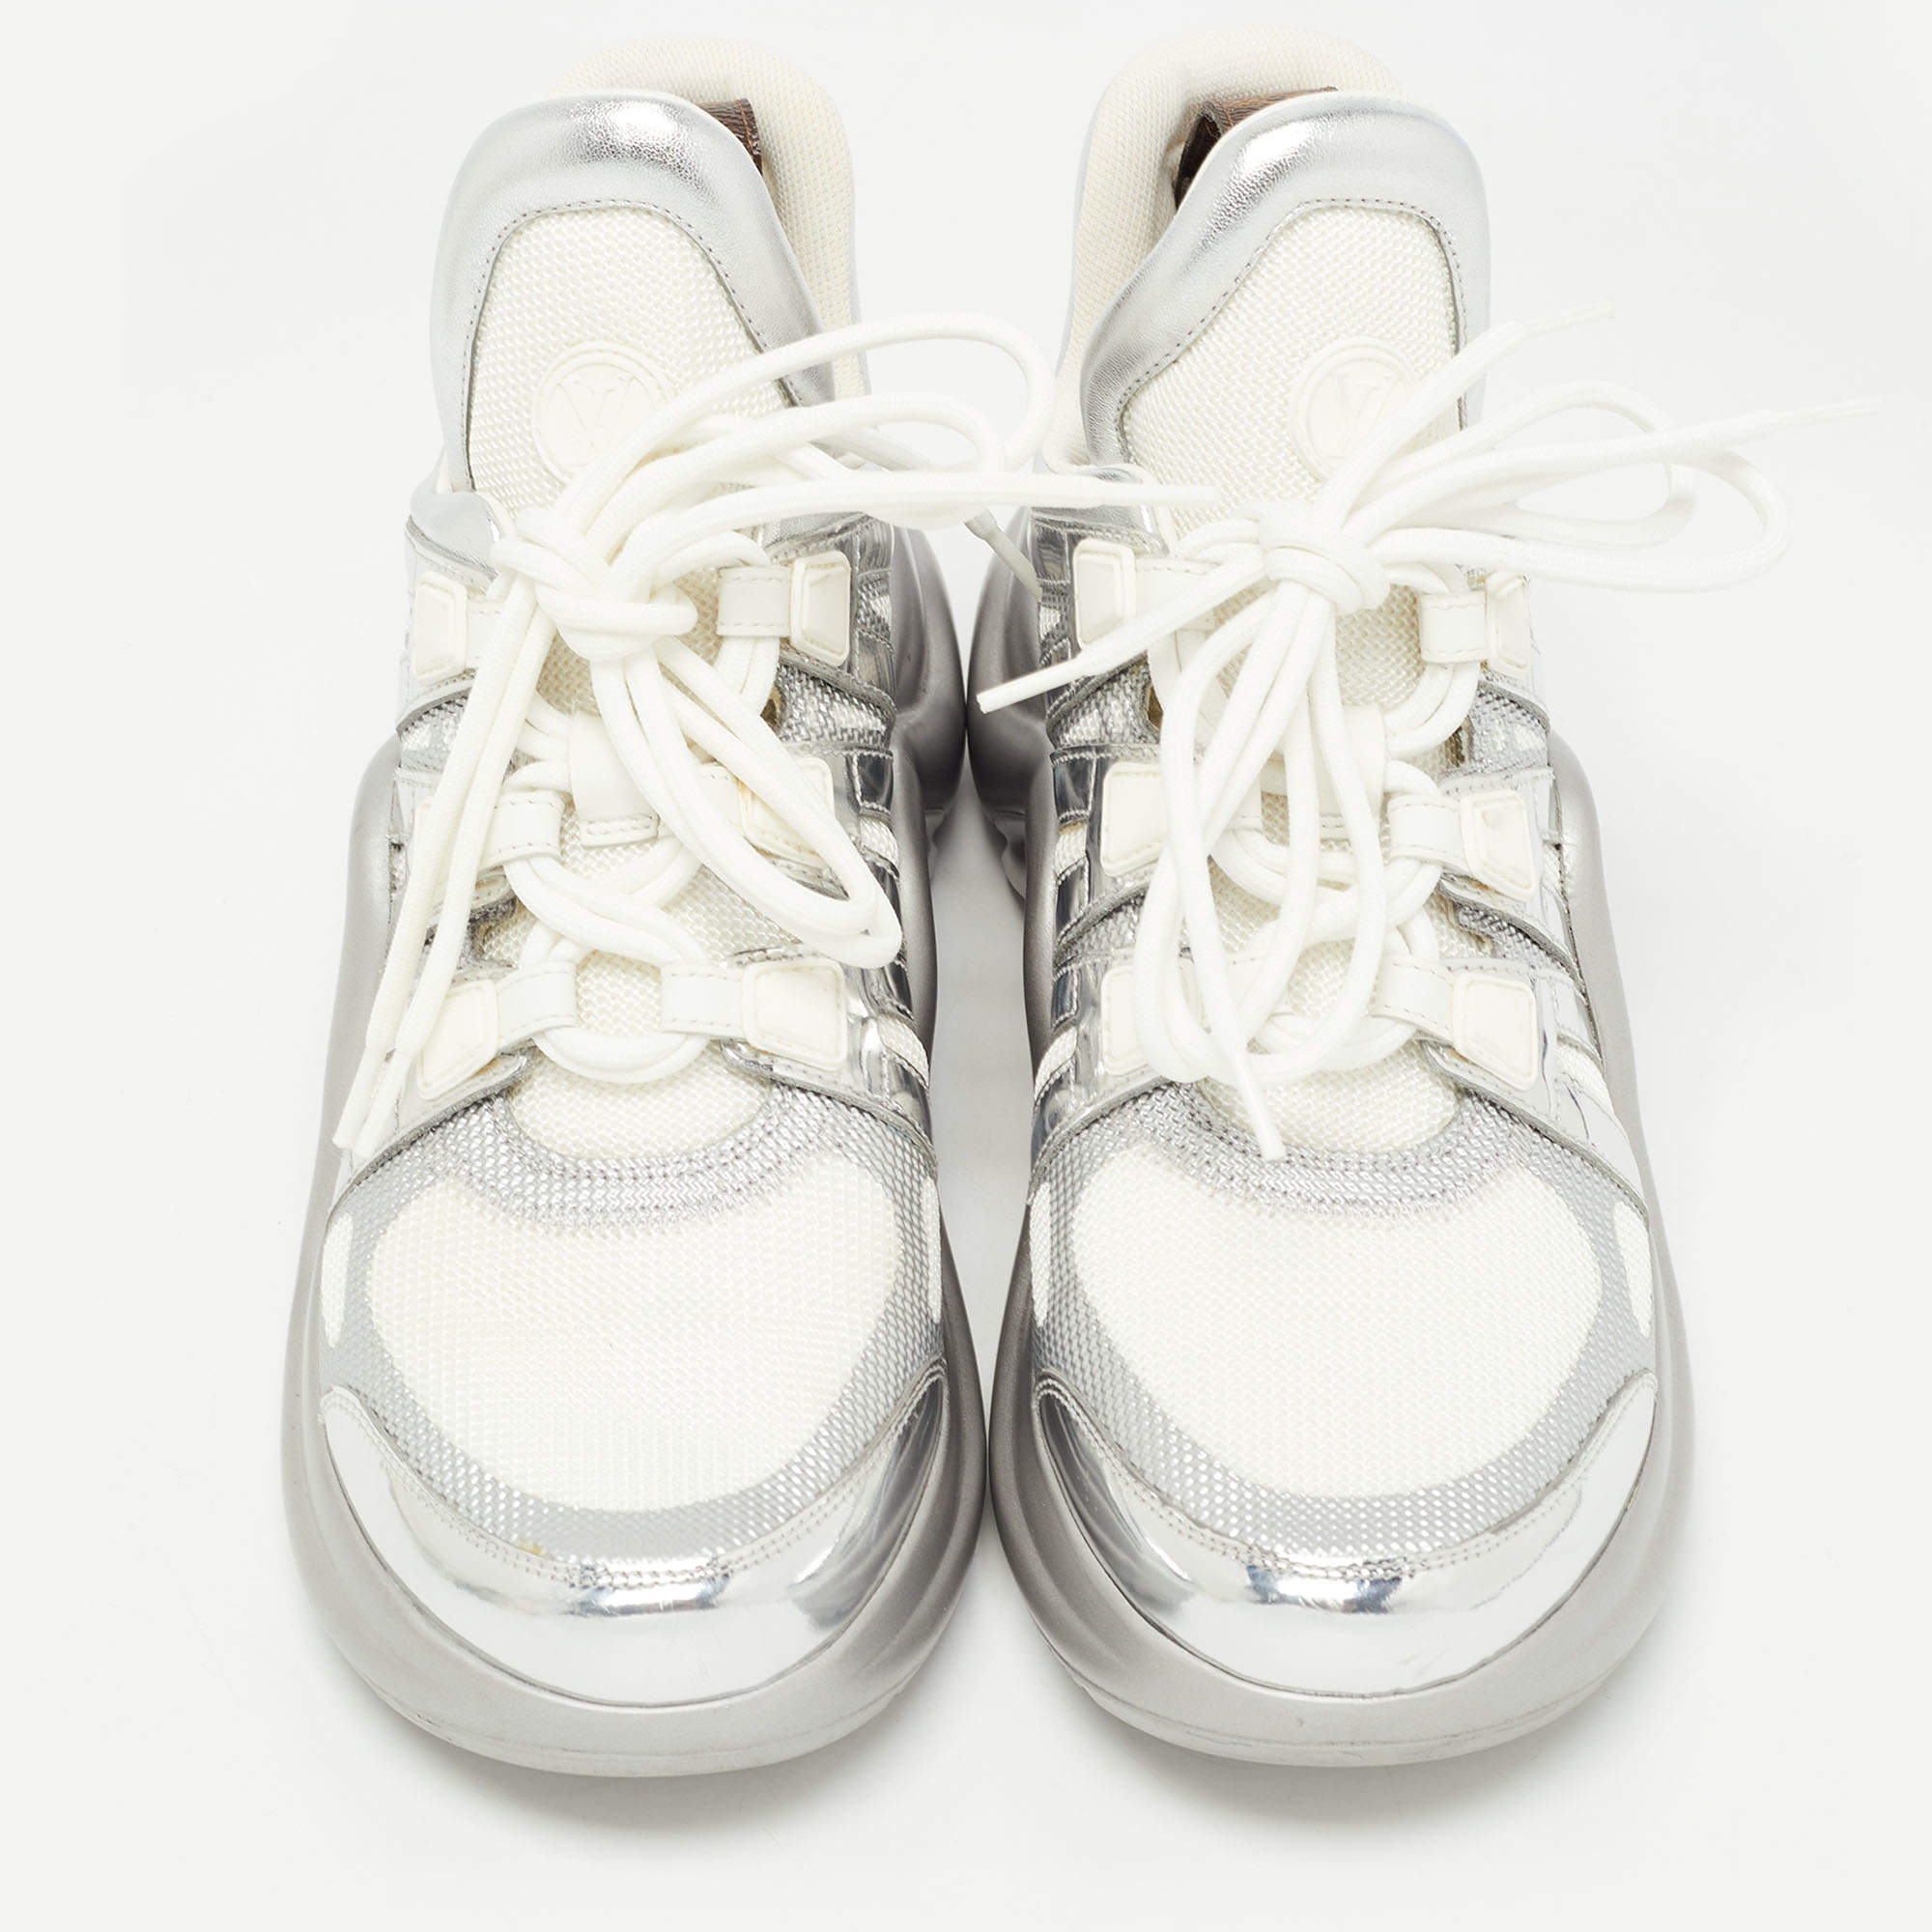 LOUIS VUITTON #35782 White Leather Archlight Sneakers (US 9 EU 39) – ALL  YOUR BLISS